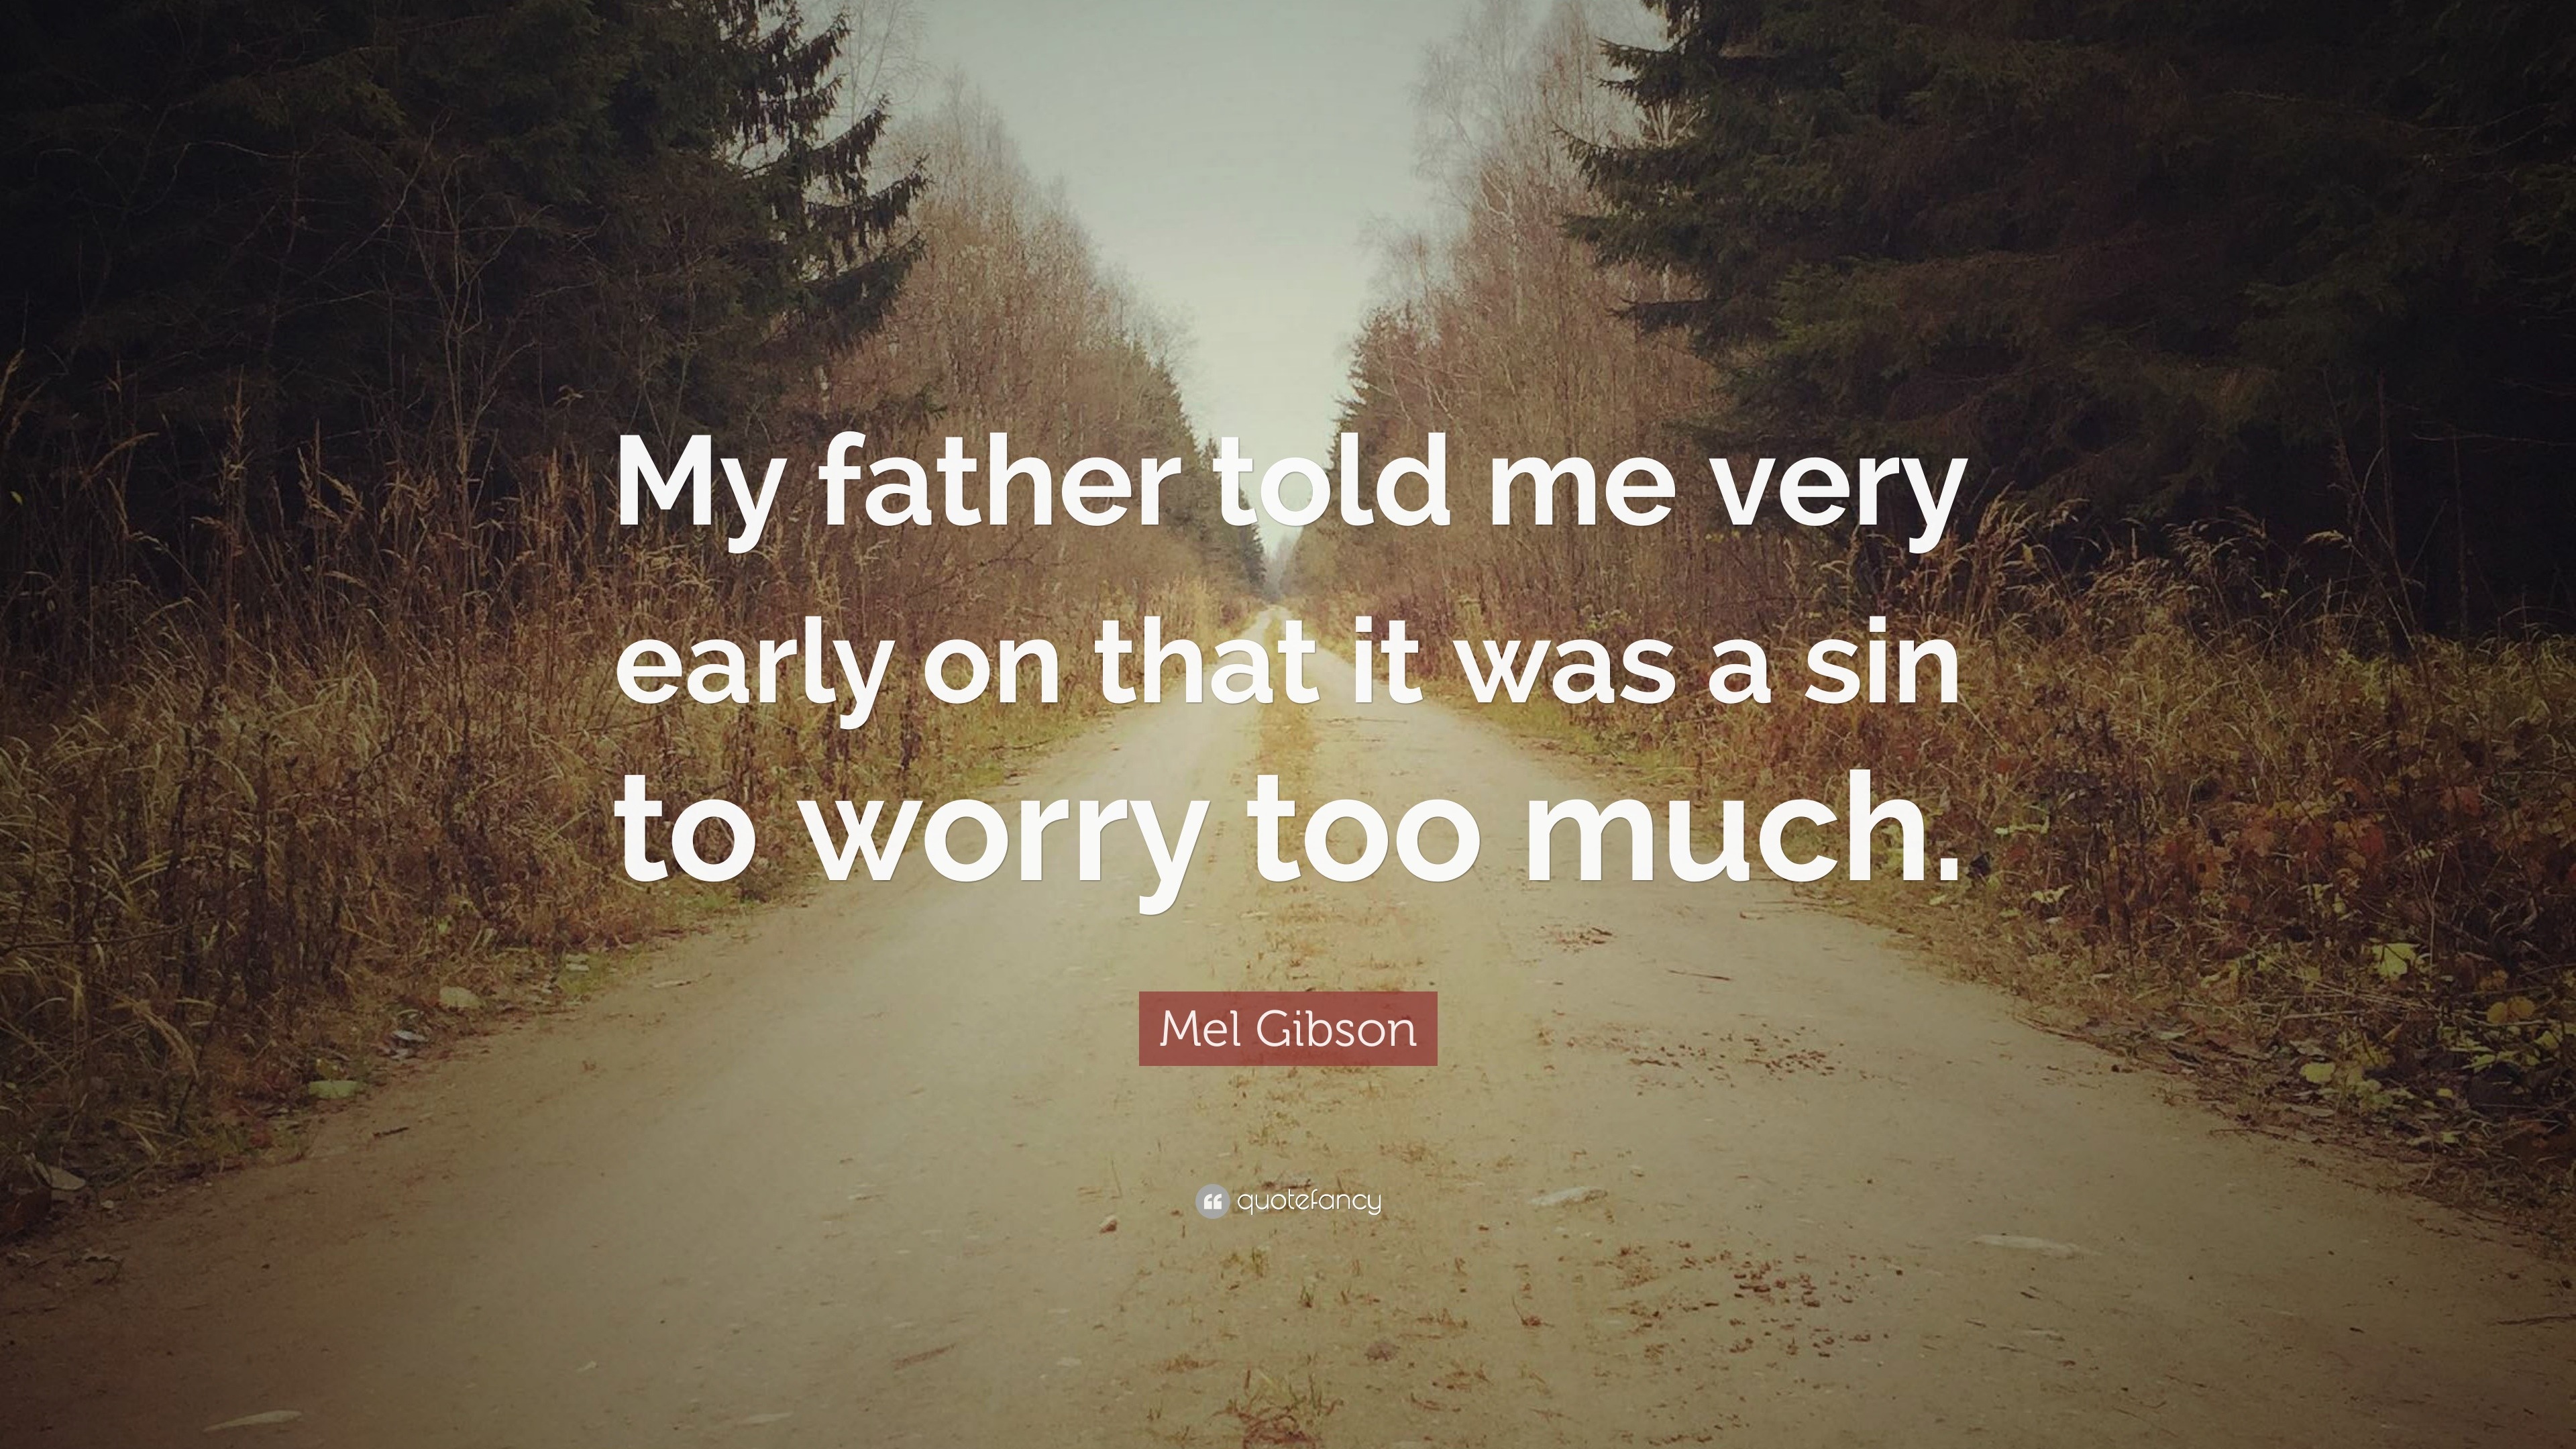 Mel Gibson Quote “my Father Told Me Very Early On That It Was A Sin To Worry Too Much ”